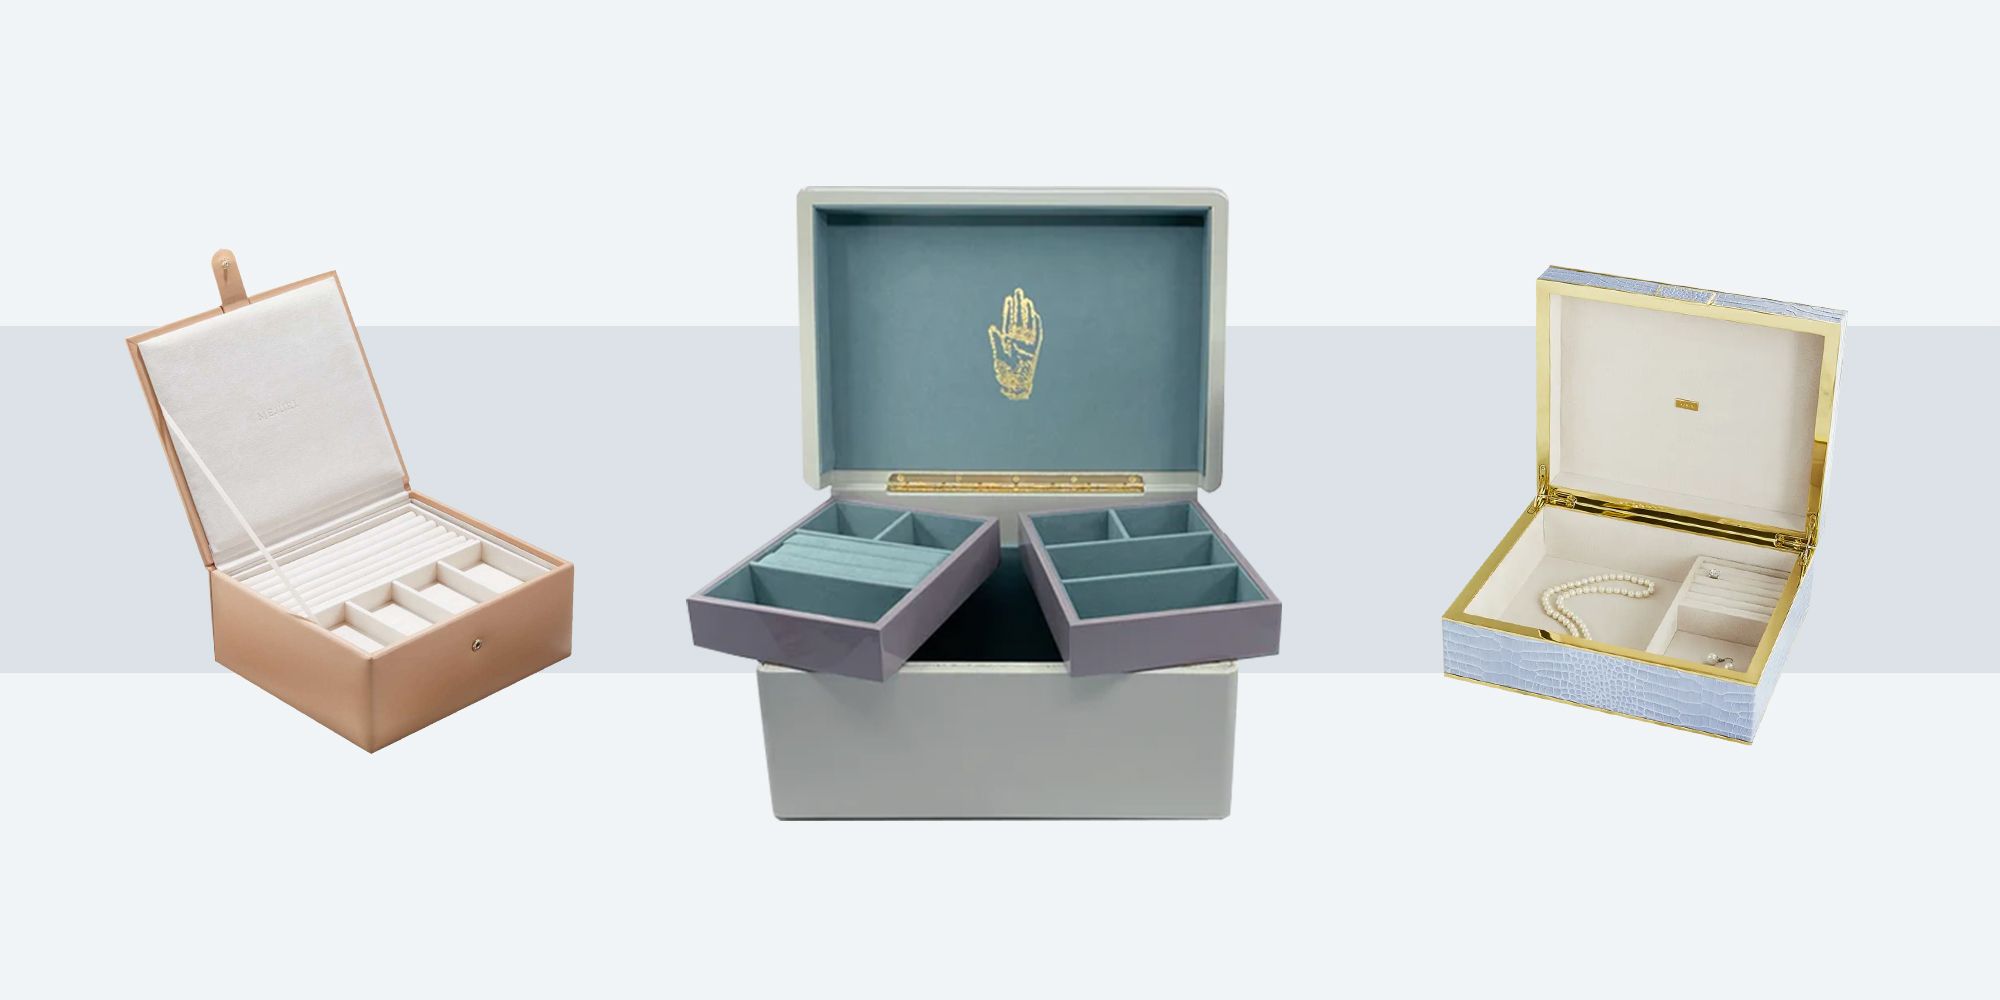 10 Best Jewelry Boxes and Organizers : Luxury Jewelry Boxes